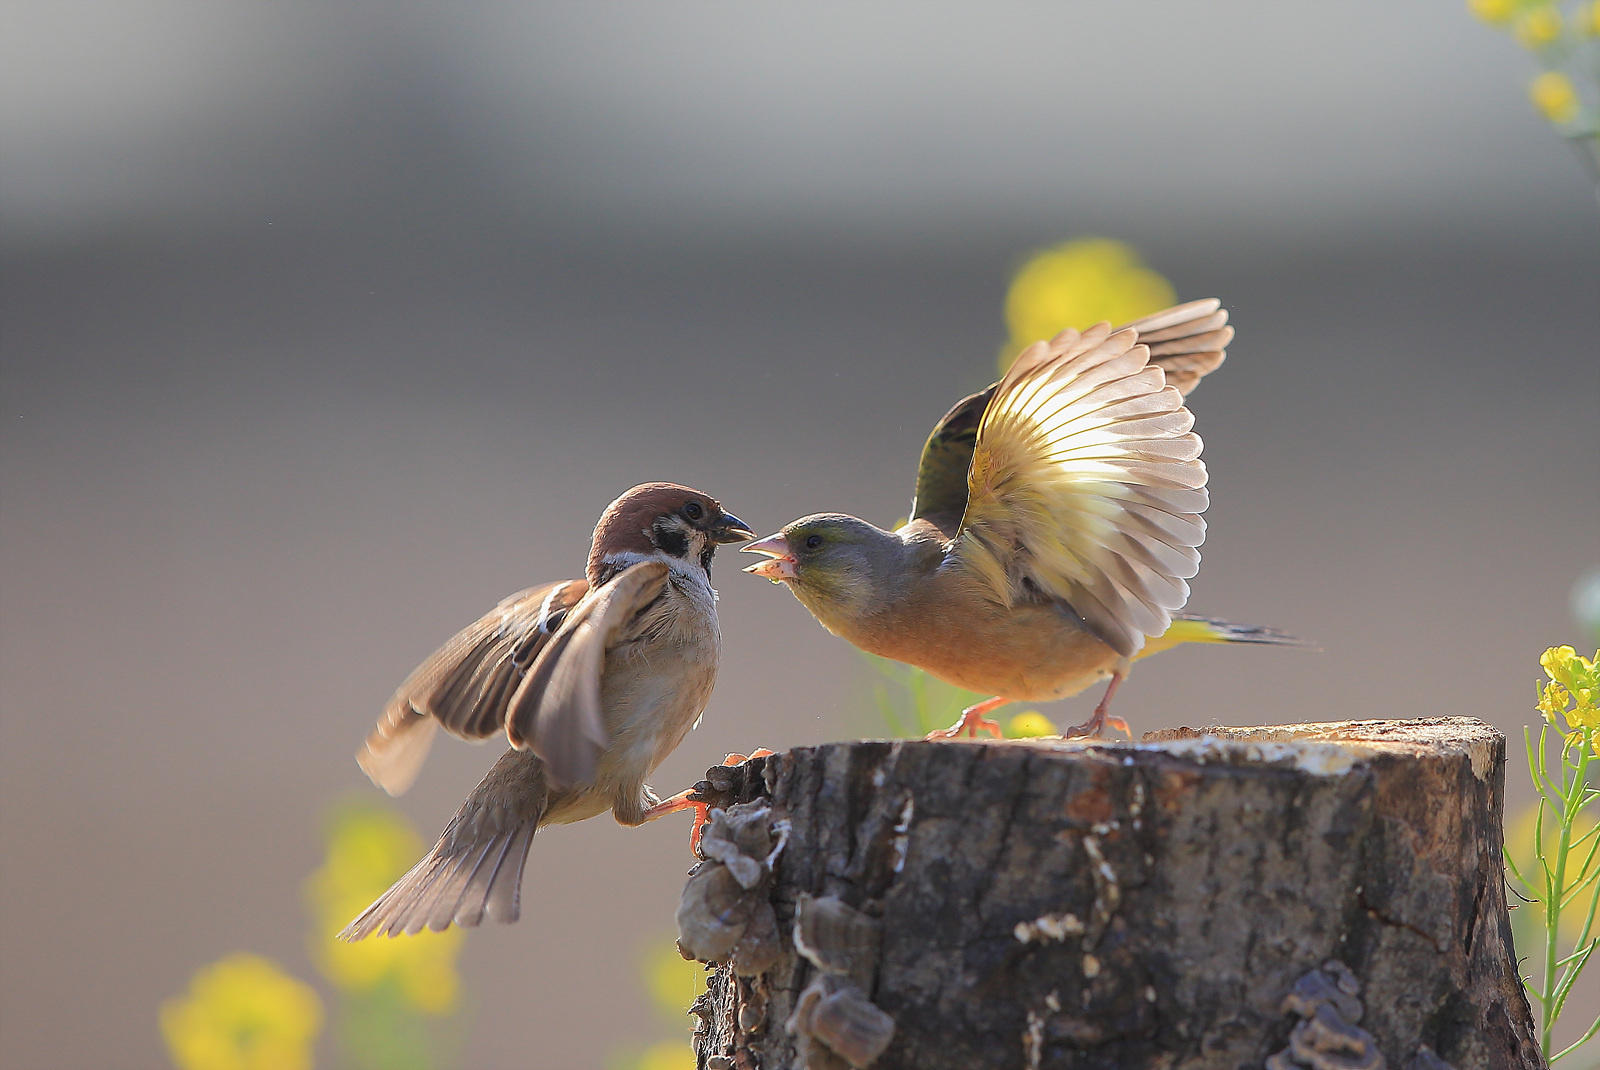 Sparrow and Green linnet